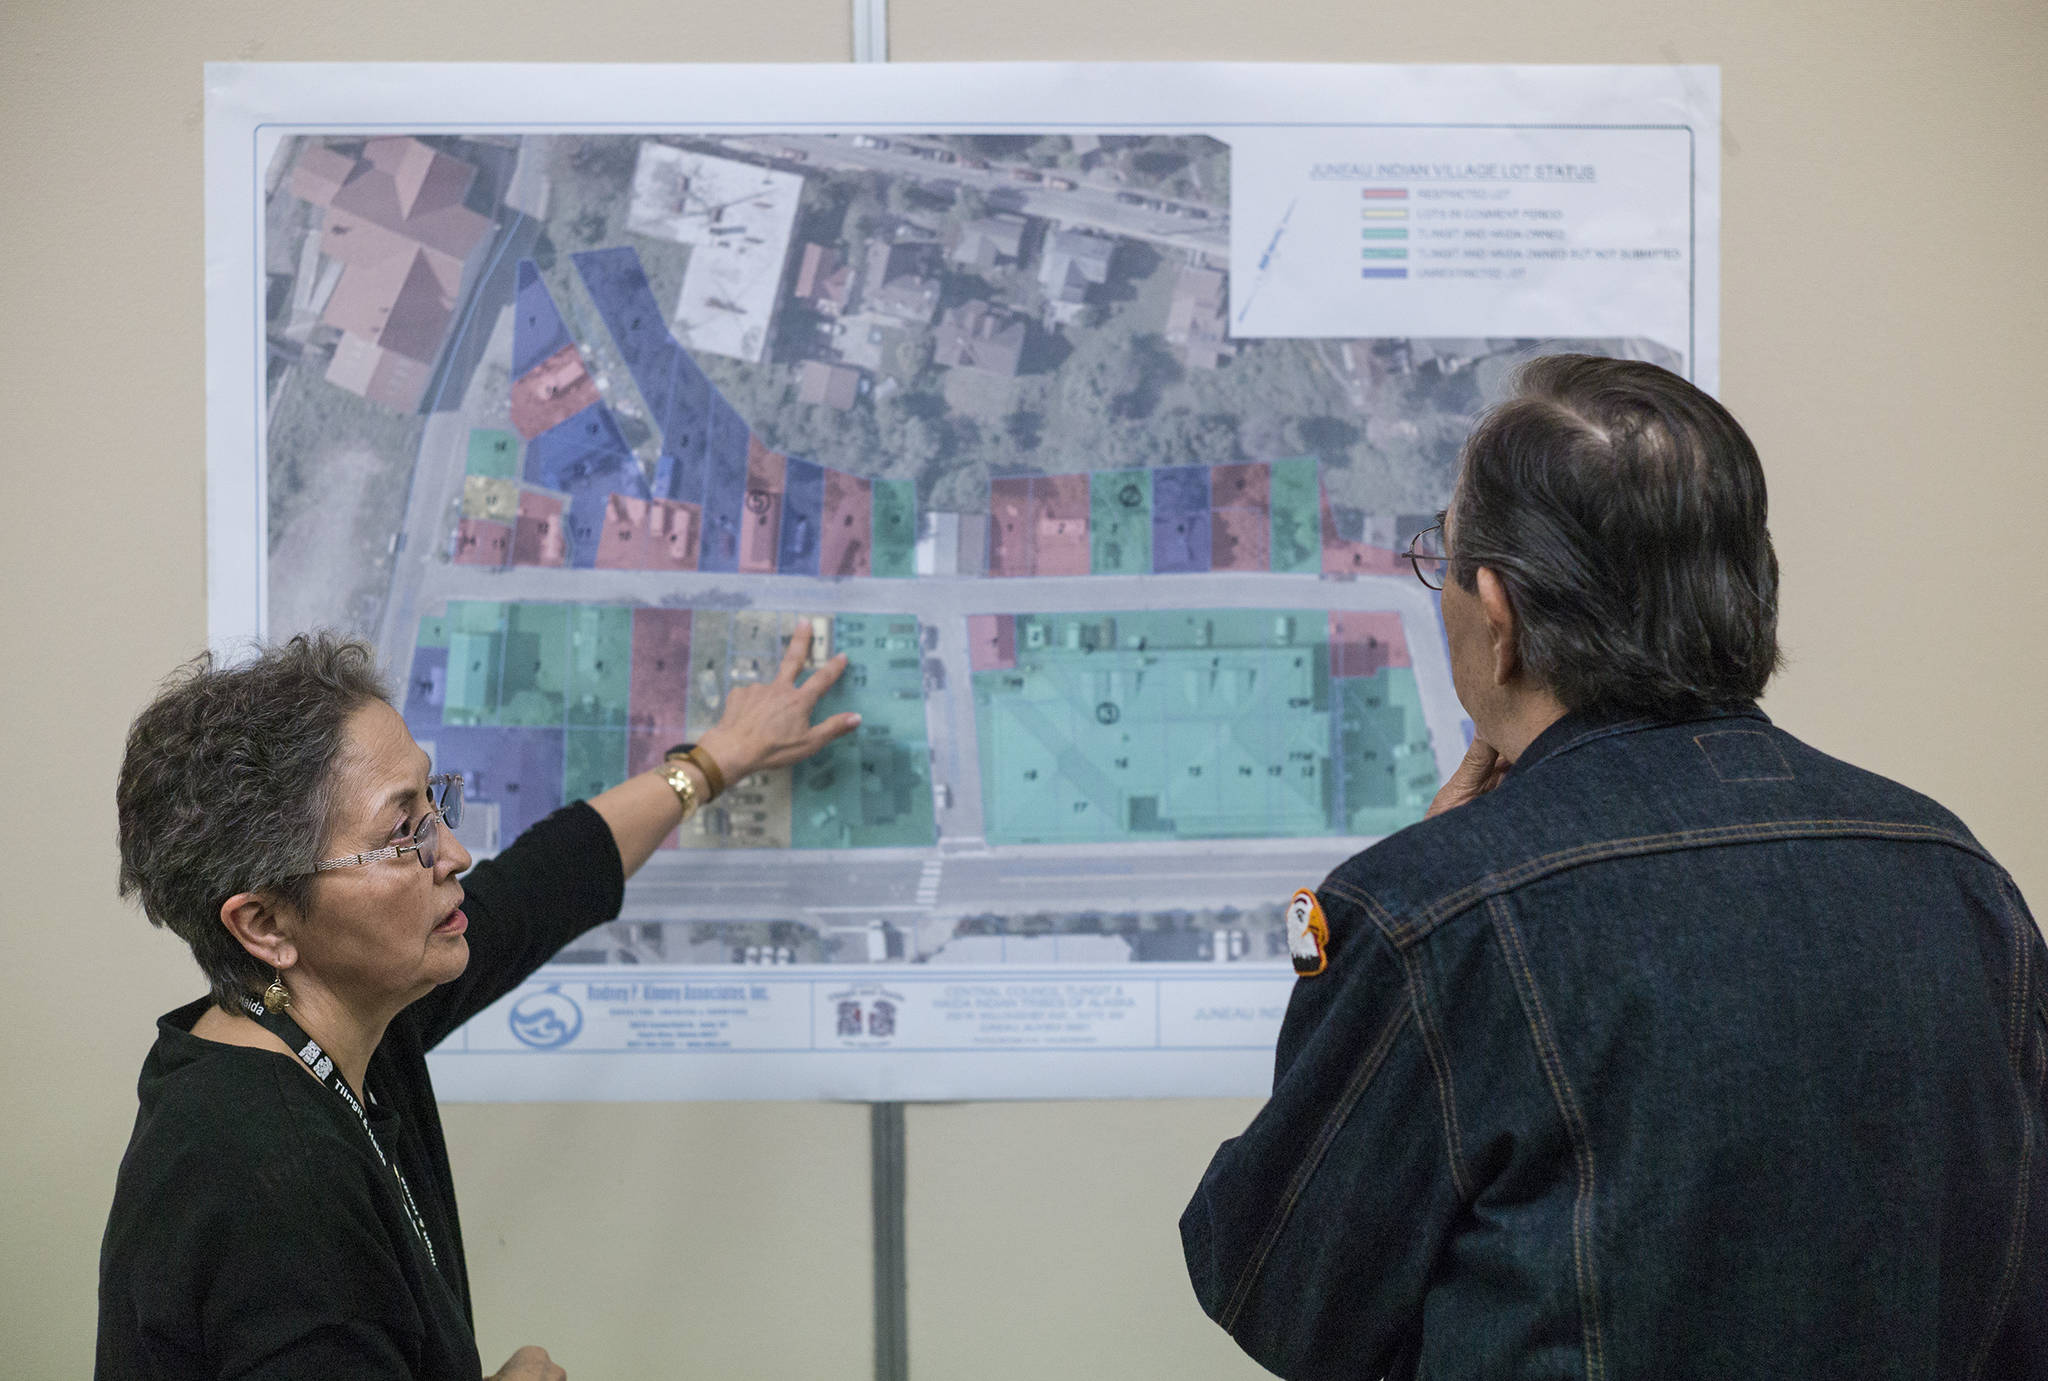 Corrine Garza, Chief Operating Officer Tribal Operations of Central Council of the Tlingit and Haida Indian Tribes of Alaska, explains a map of the Juneau Indian Village to Melvin Ward during a public meeting at the Elizabeth Peratrovich Hall on Wednesday, May 31, 2017. The Tlingit & Haida open house discussed Tlingit & Haida’s land into trust applications and provided an explanation on what Indian trust status is and can provide. (Michael Penn | Juneau Empire)